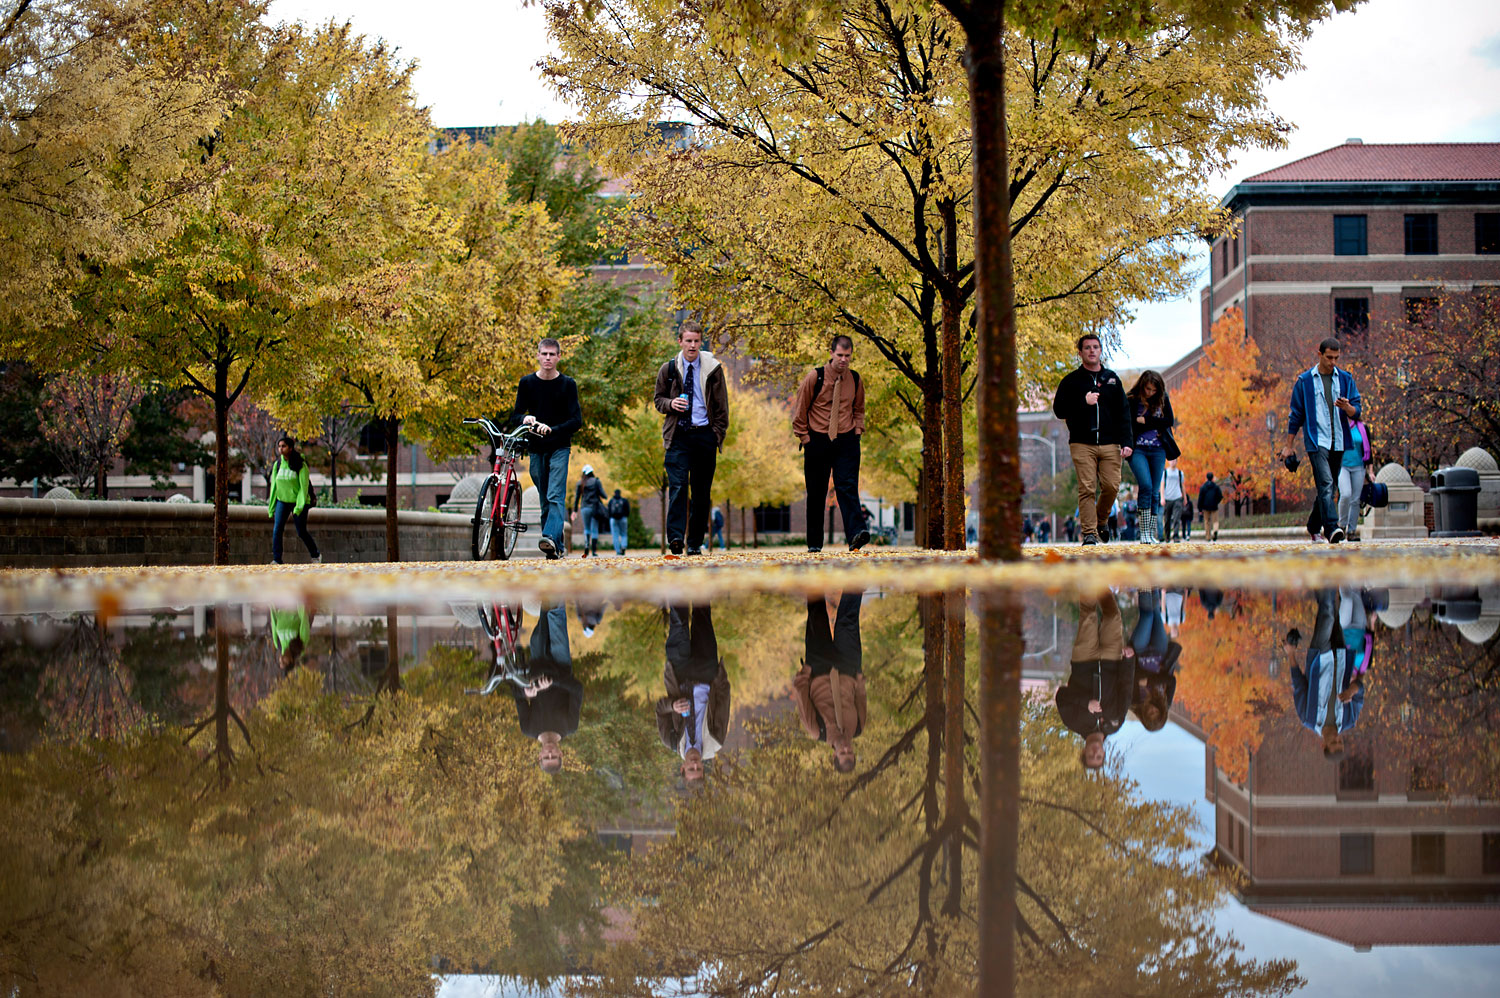 Students walk on the Purdue Mall on the campus of Purdue University in West Lafayette, Indiana, Oct. 22, 2012. (Daniel Acker&mdash;Bloomberg/Getty Images)